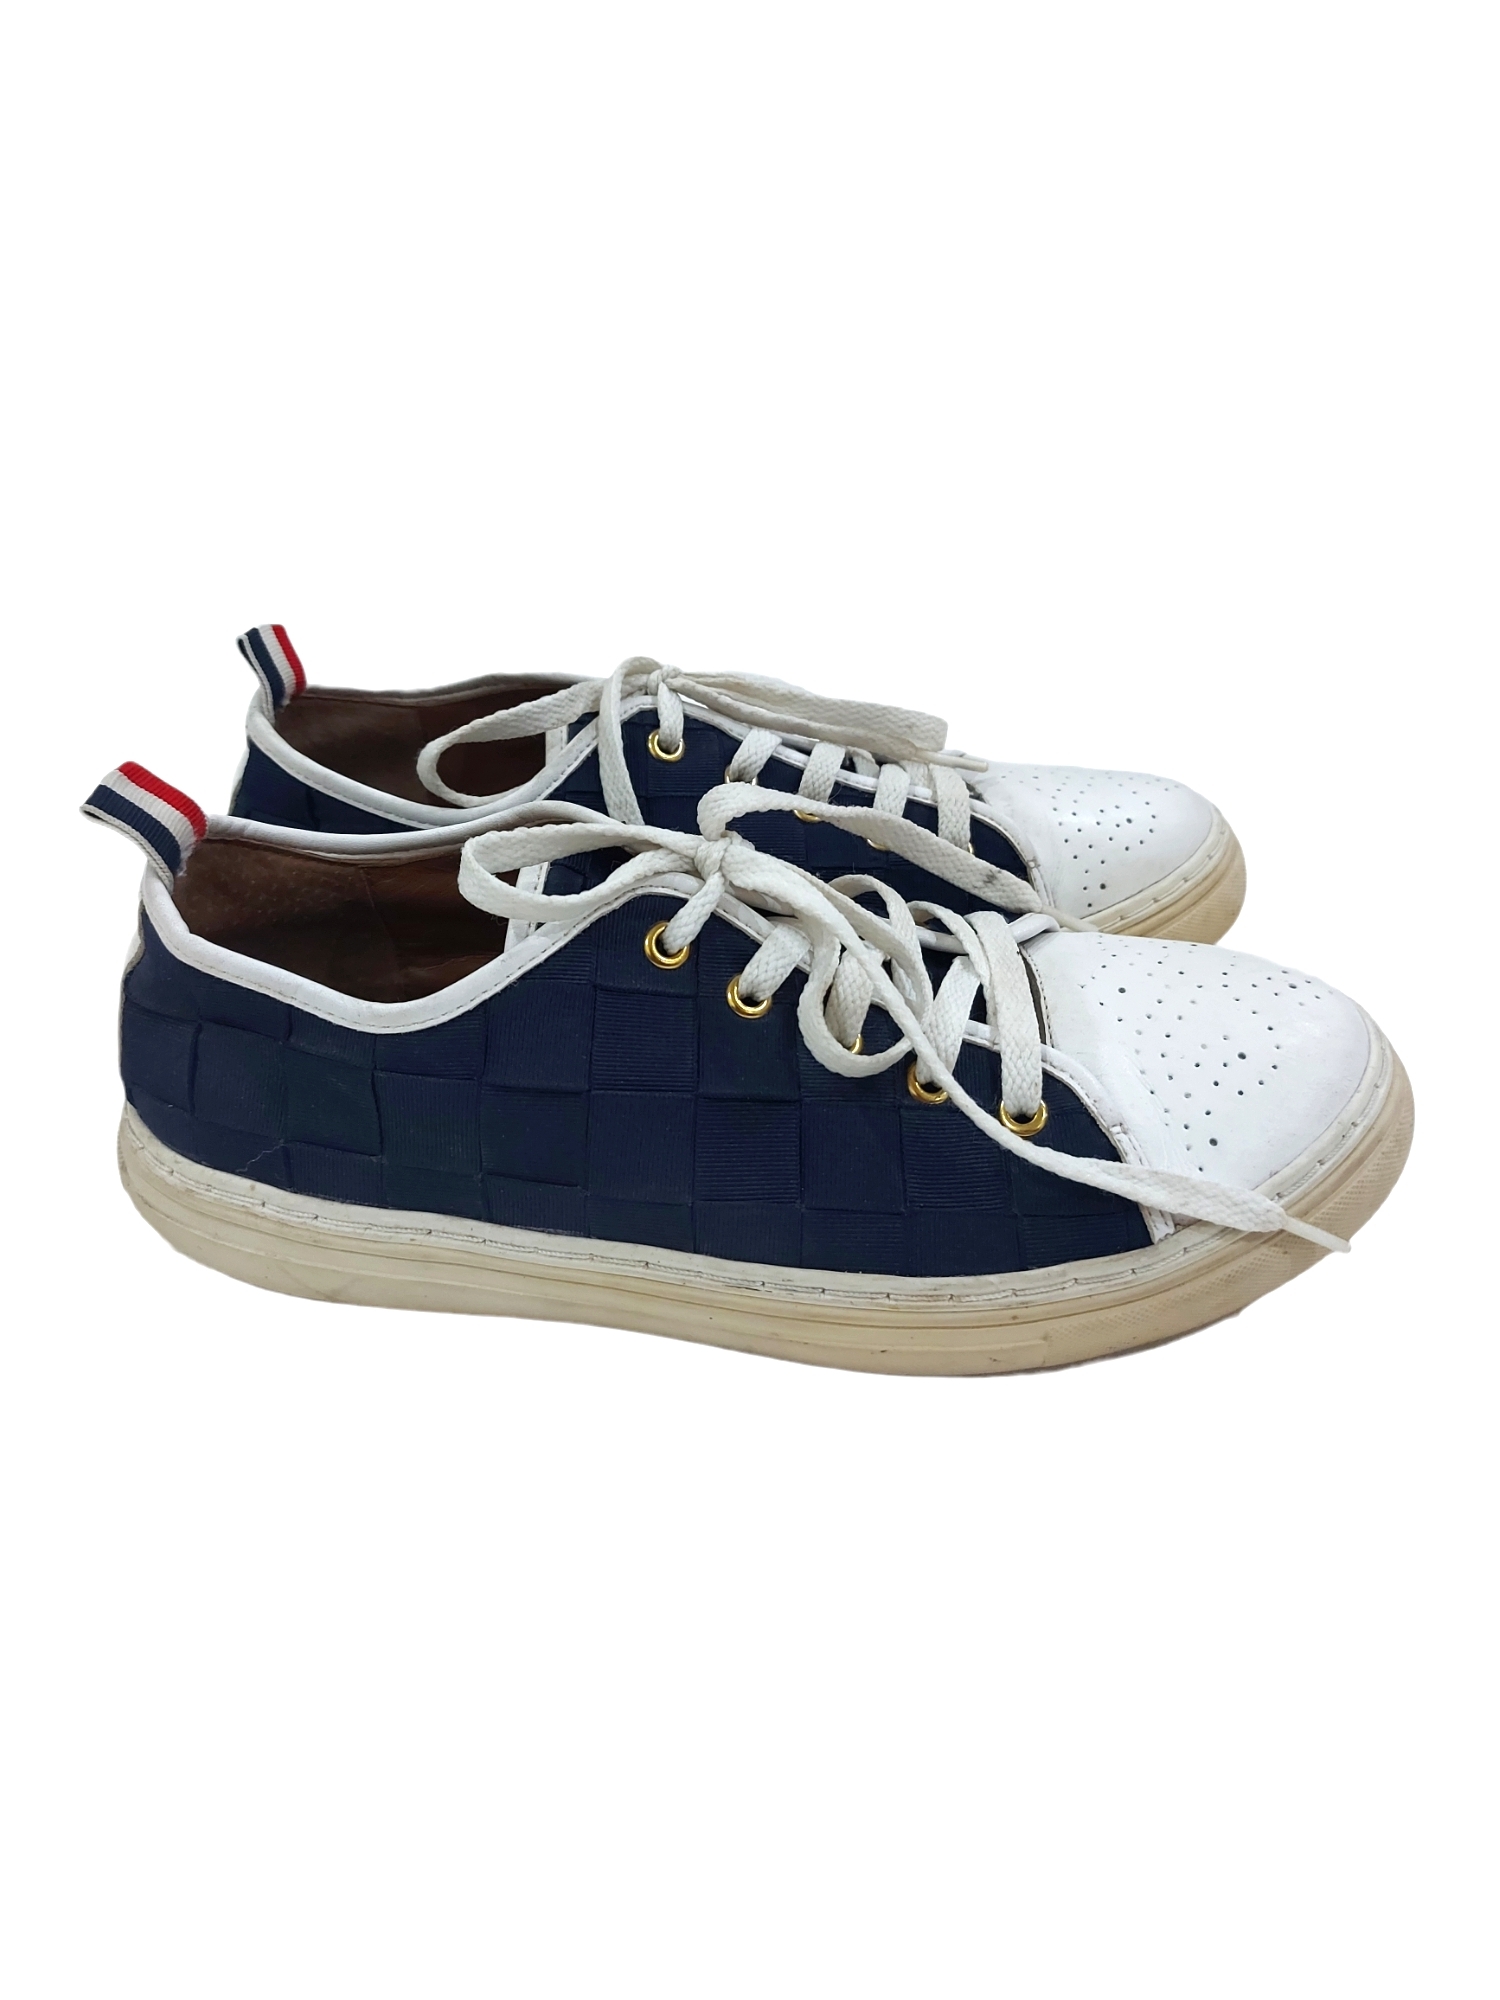 THOM BROWNE WOVEN NAVY SNEAKERS - 3